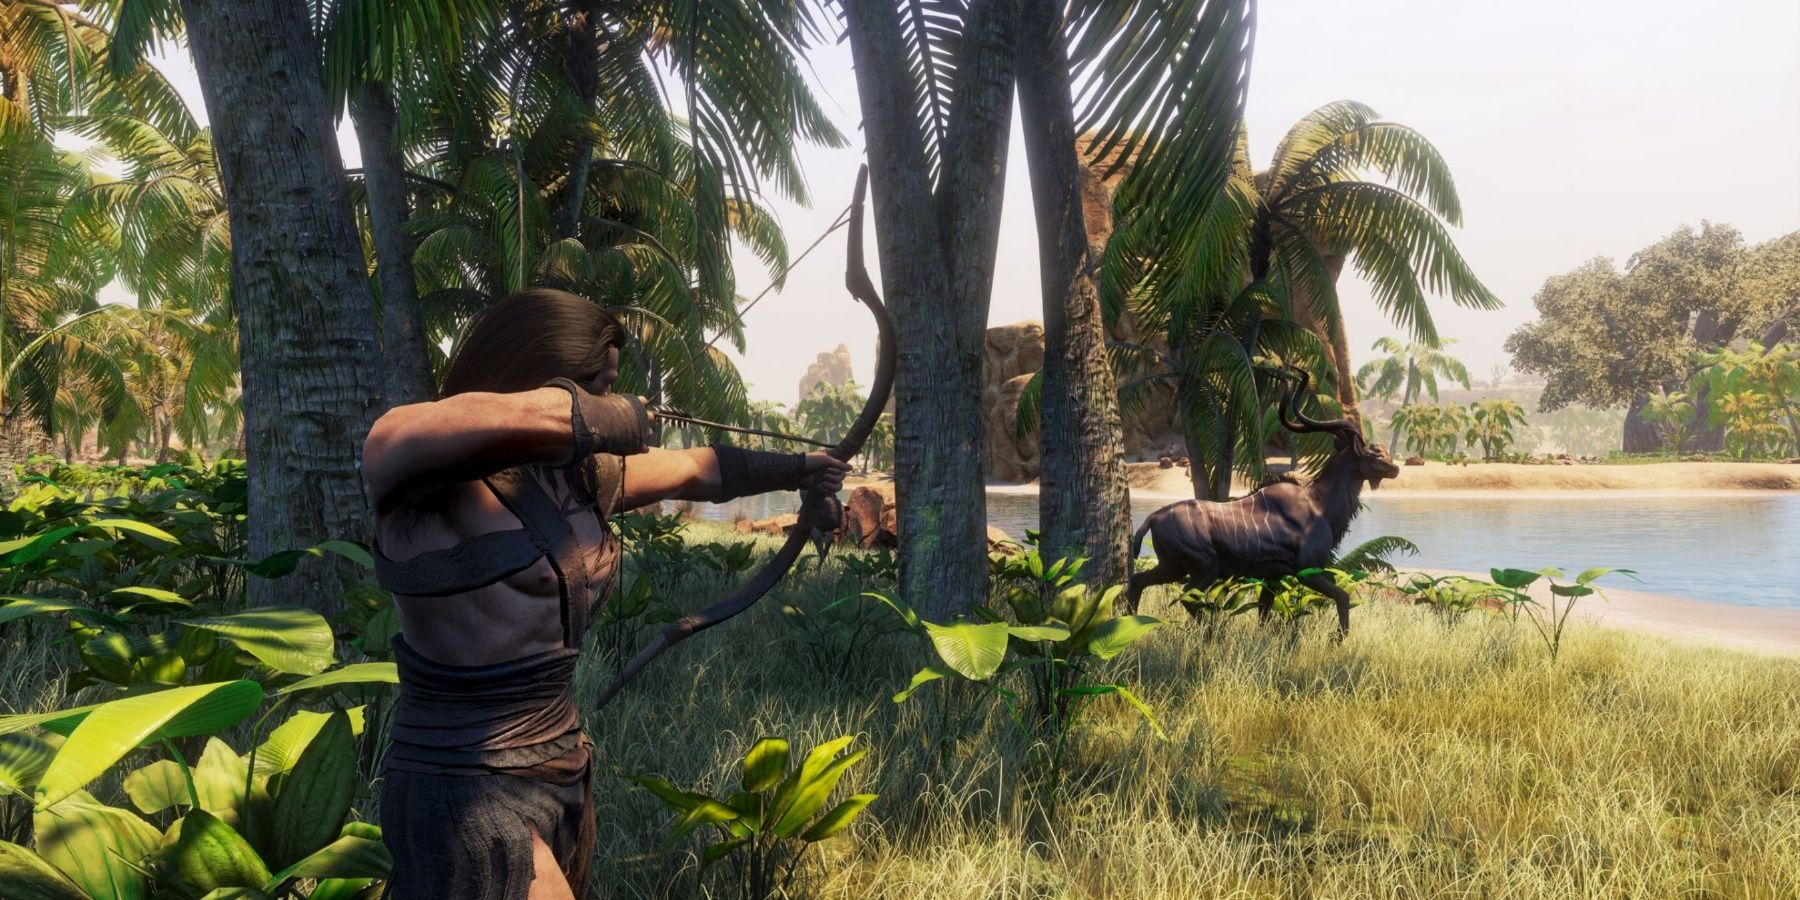 A man aiming a bow at a deer as it prances towards the beach in Conan Exiles